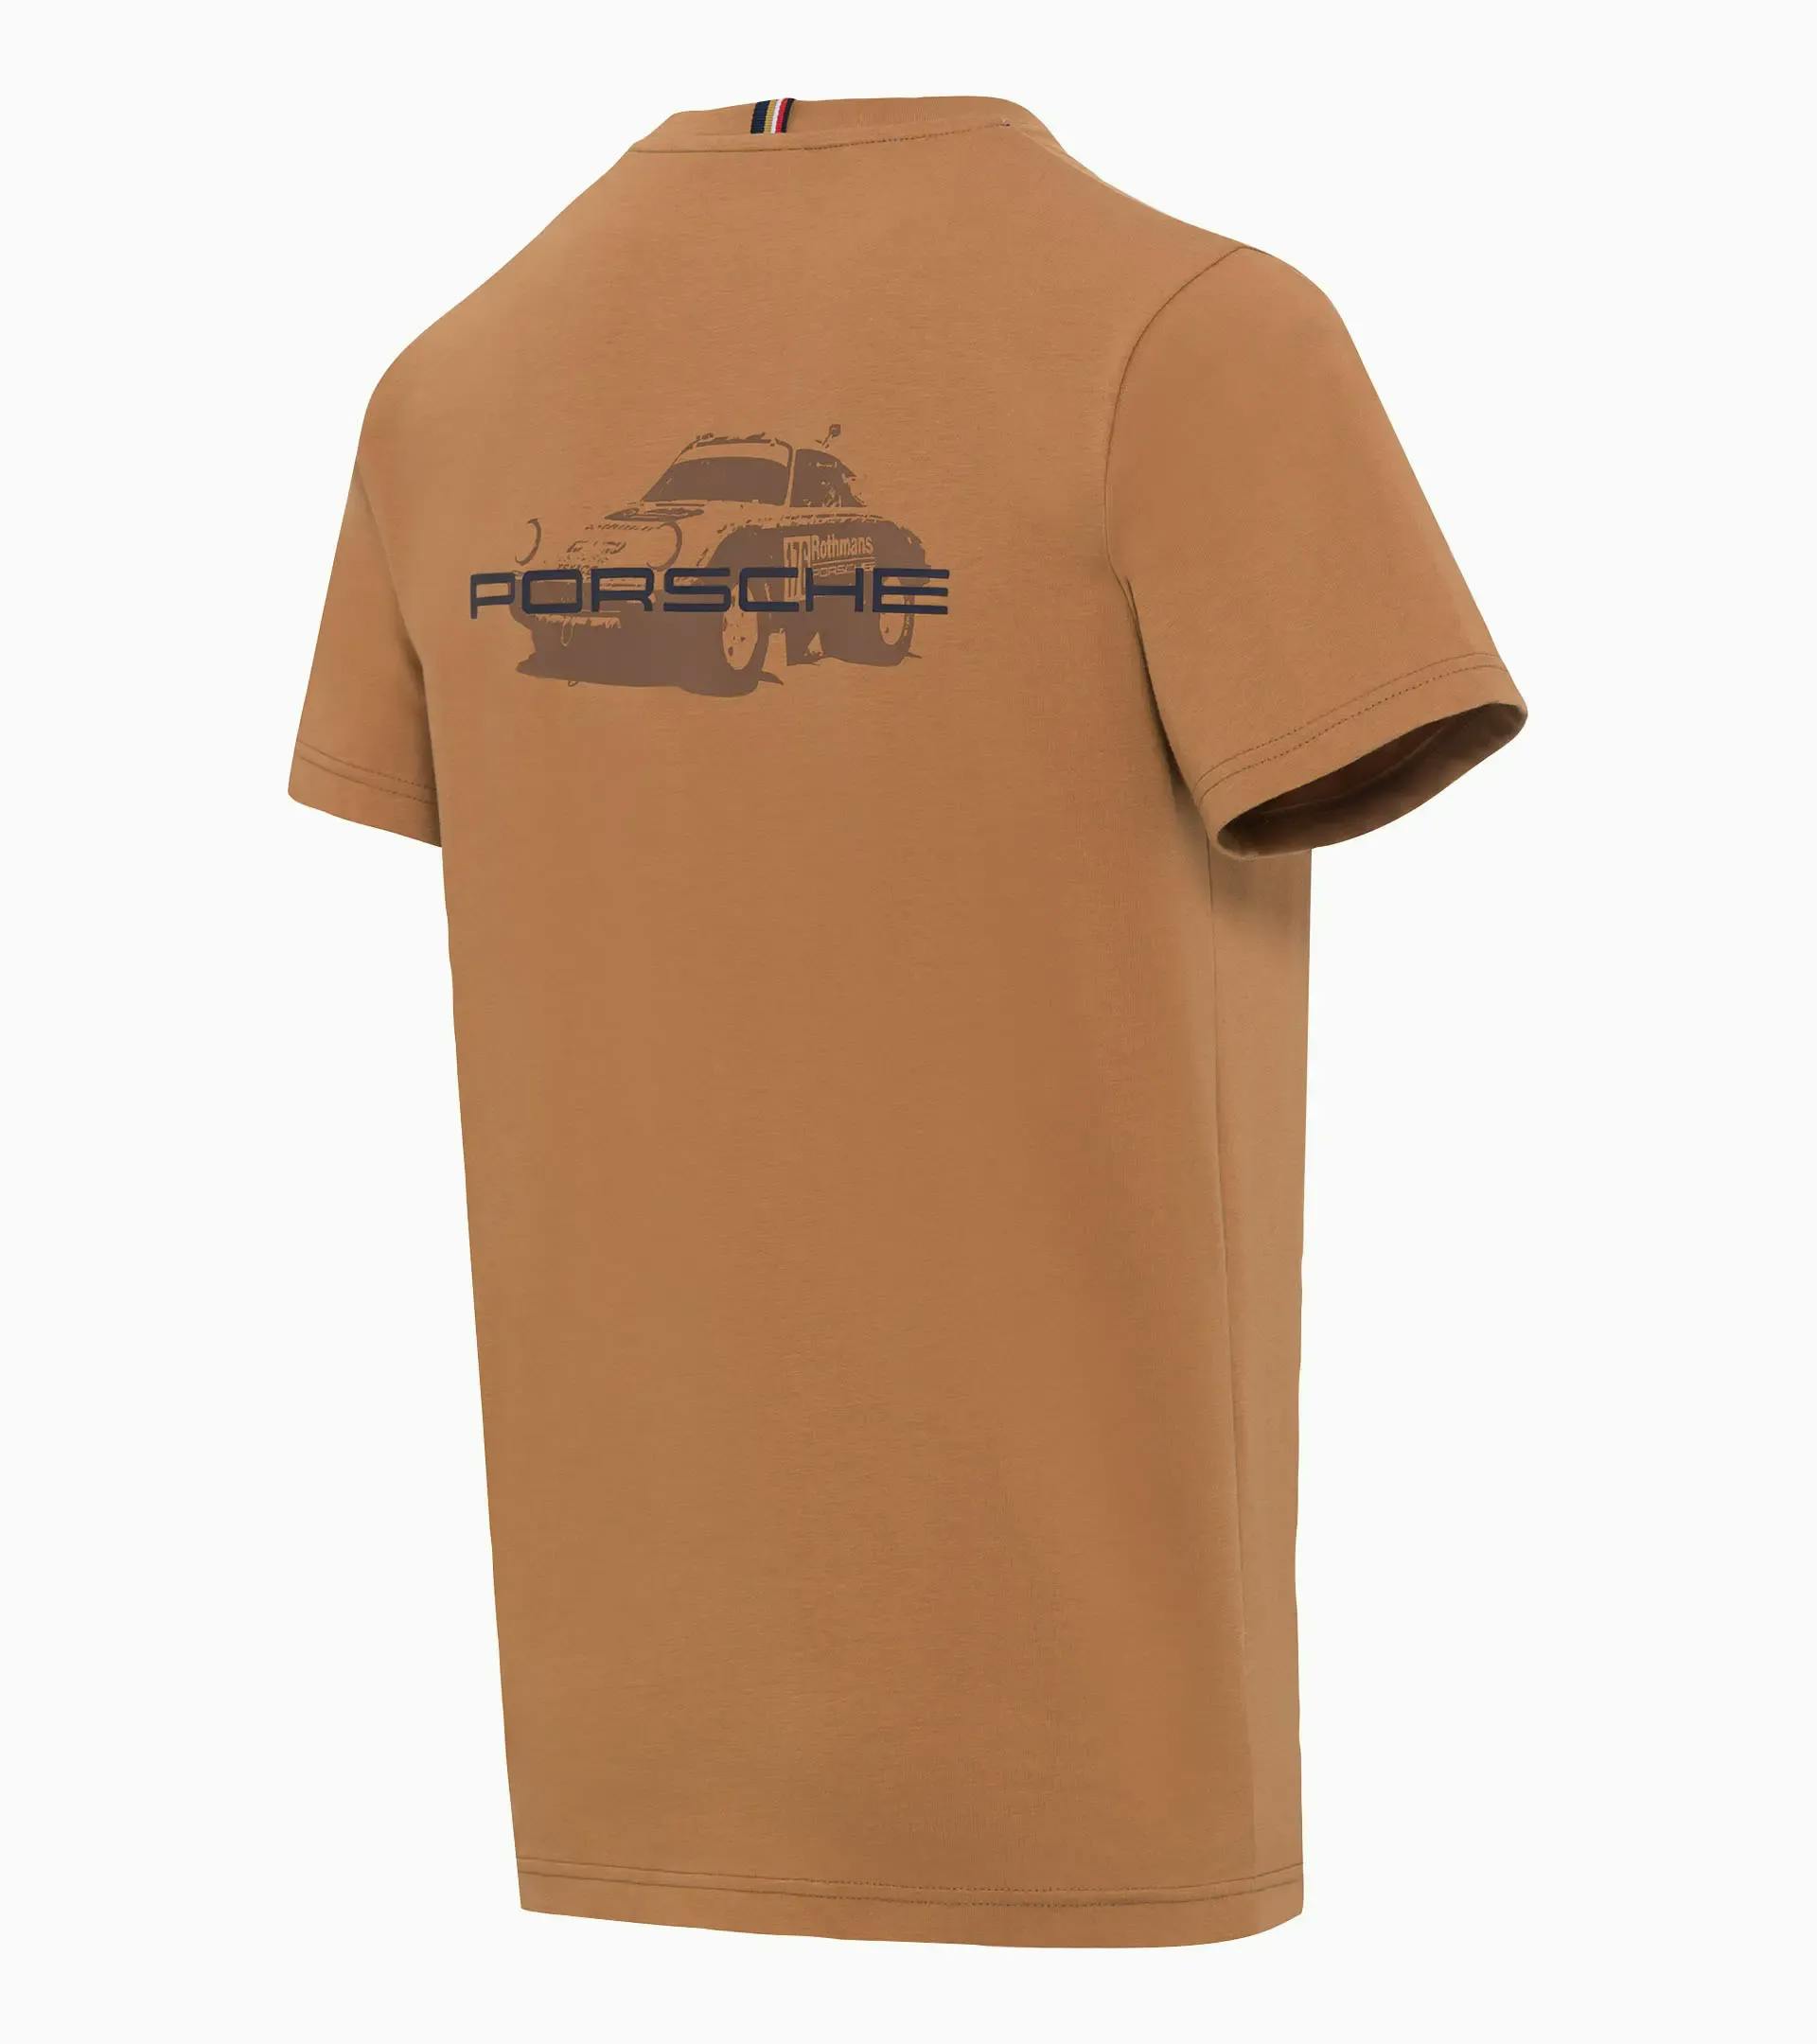 My Other T-Shirt is a Porsche - My Other Car Is - T-Shirt